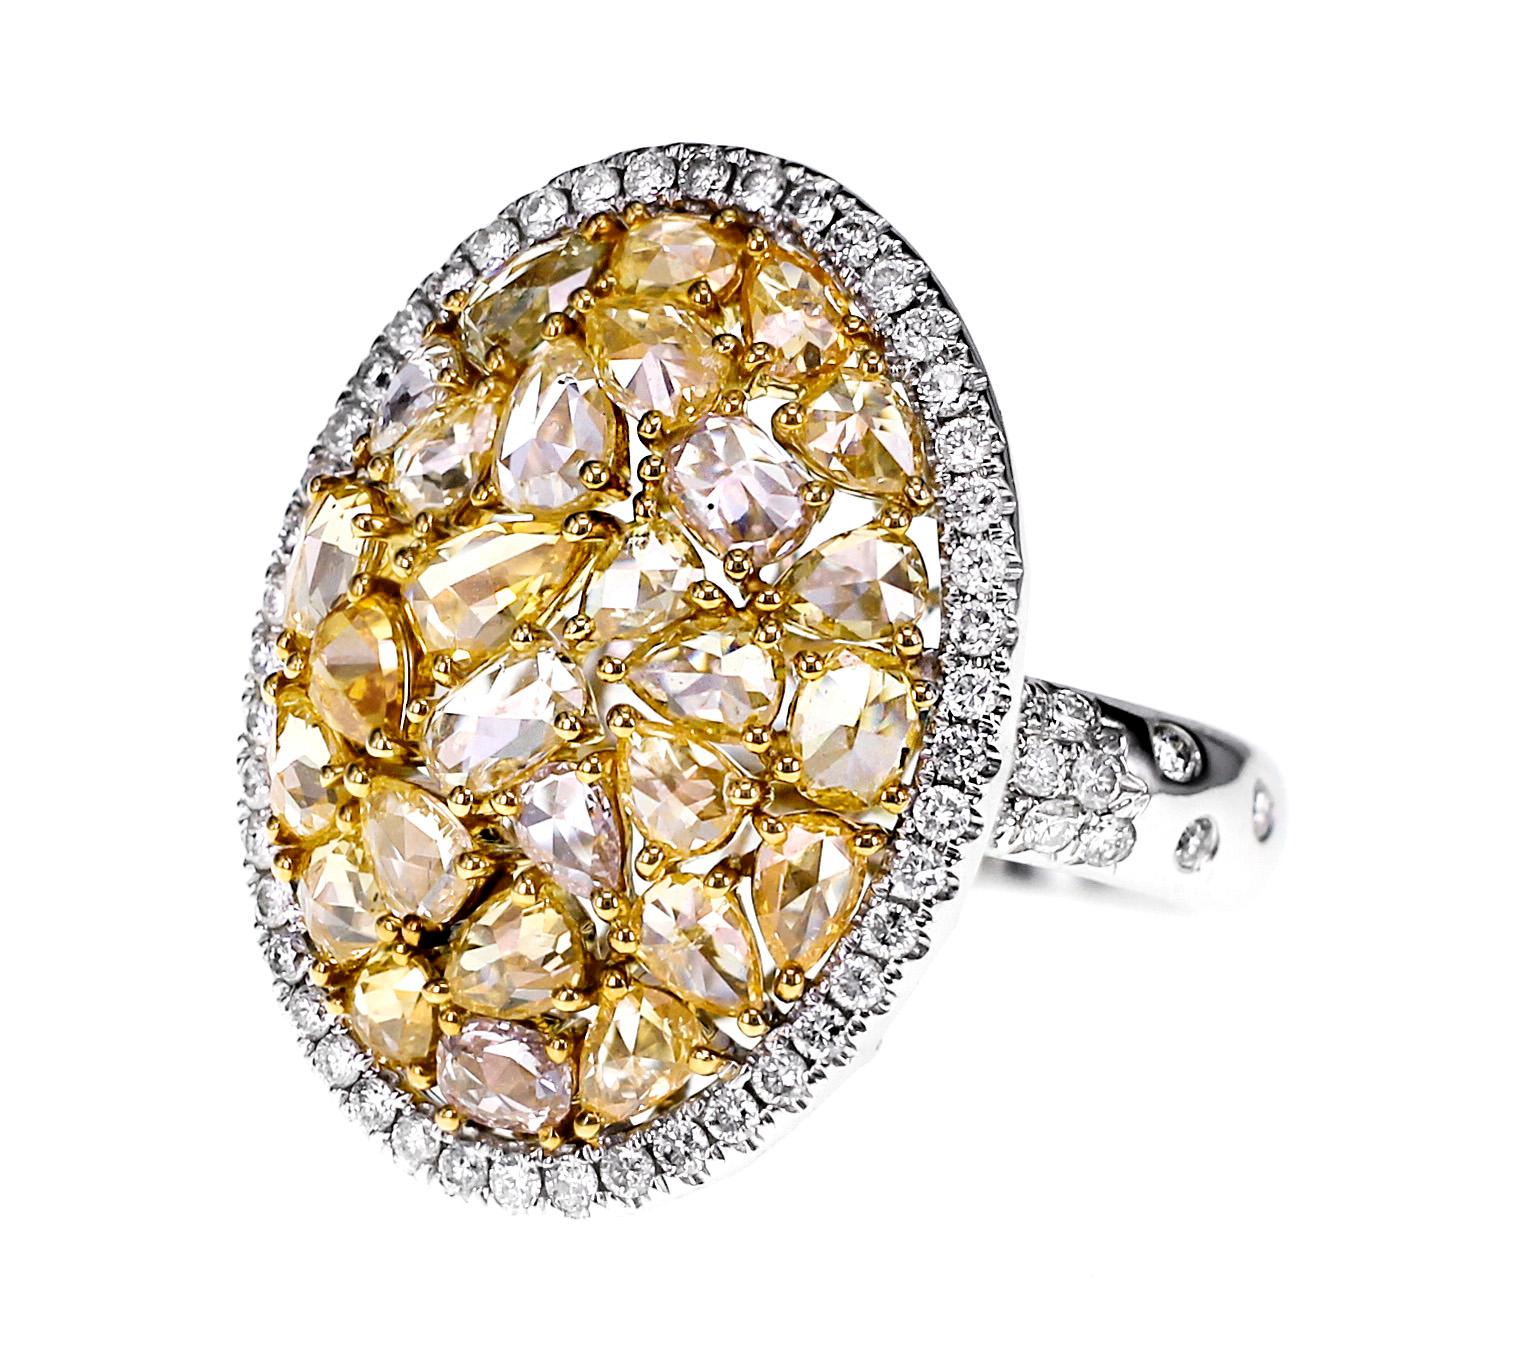 This beautiful ring has 3.68 carat of European rose cut and made in 18K white gold and yellow gold,
Ring Size: US 6